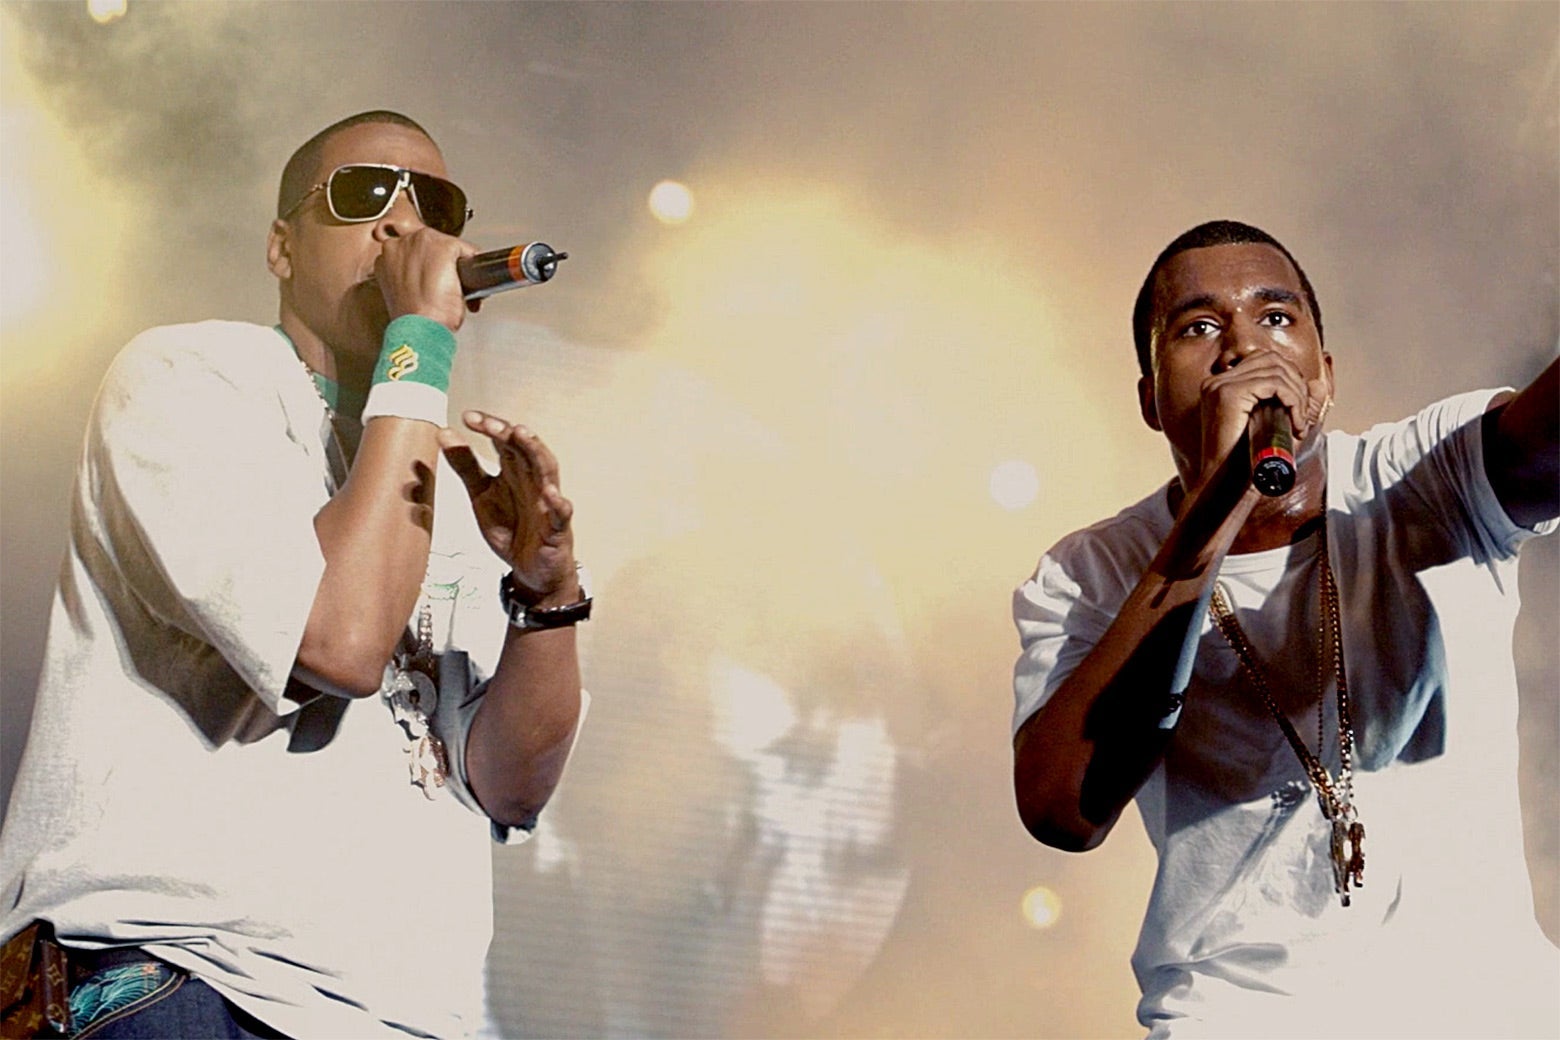 Jay-Z and Kanye West performing on stage.